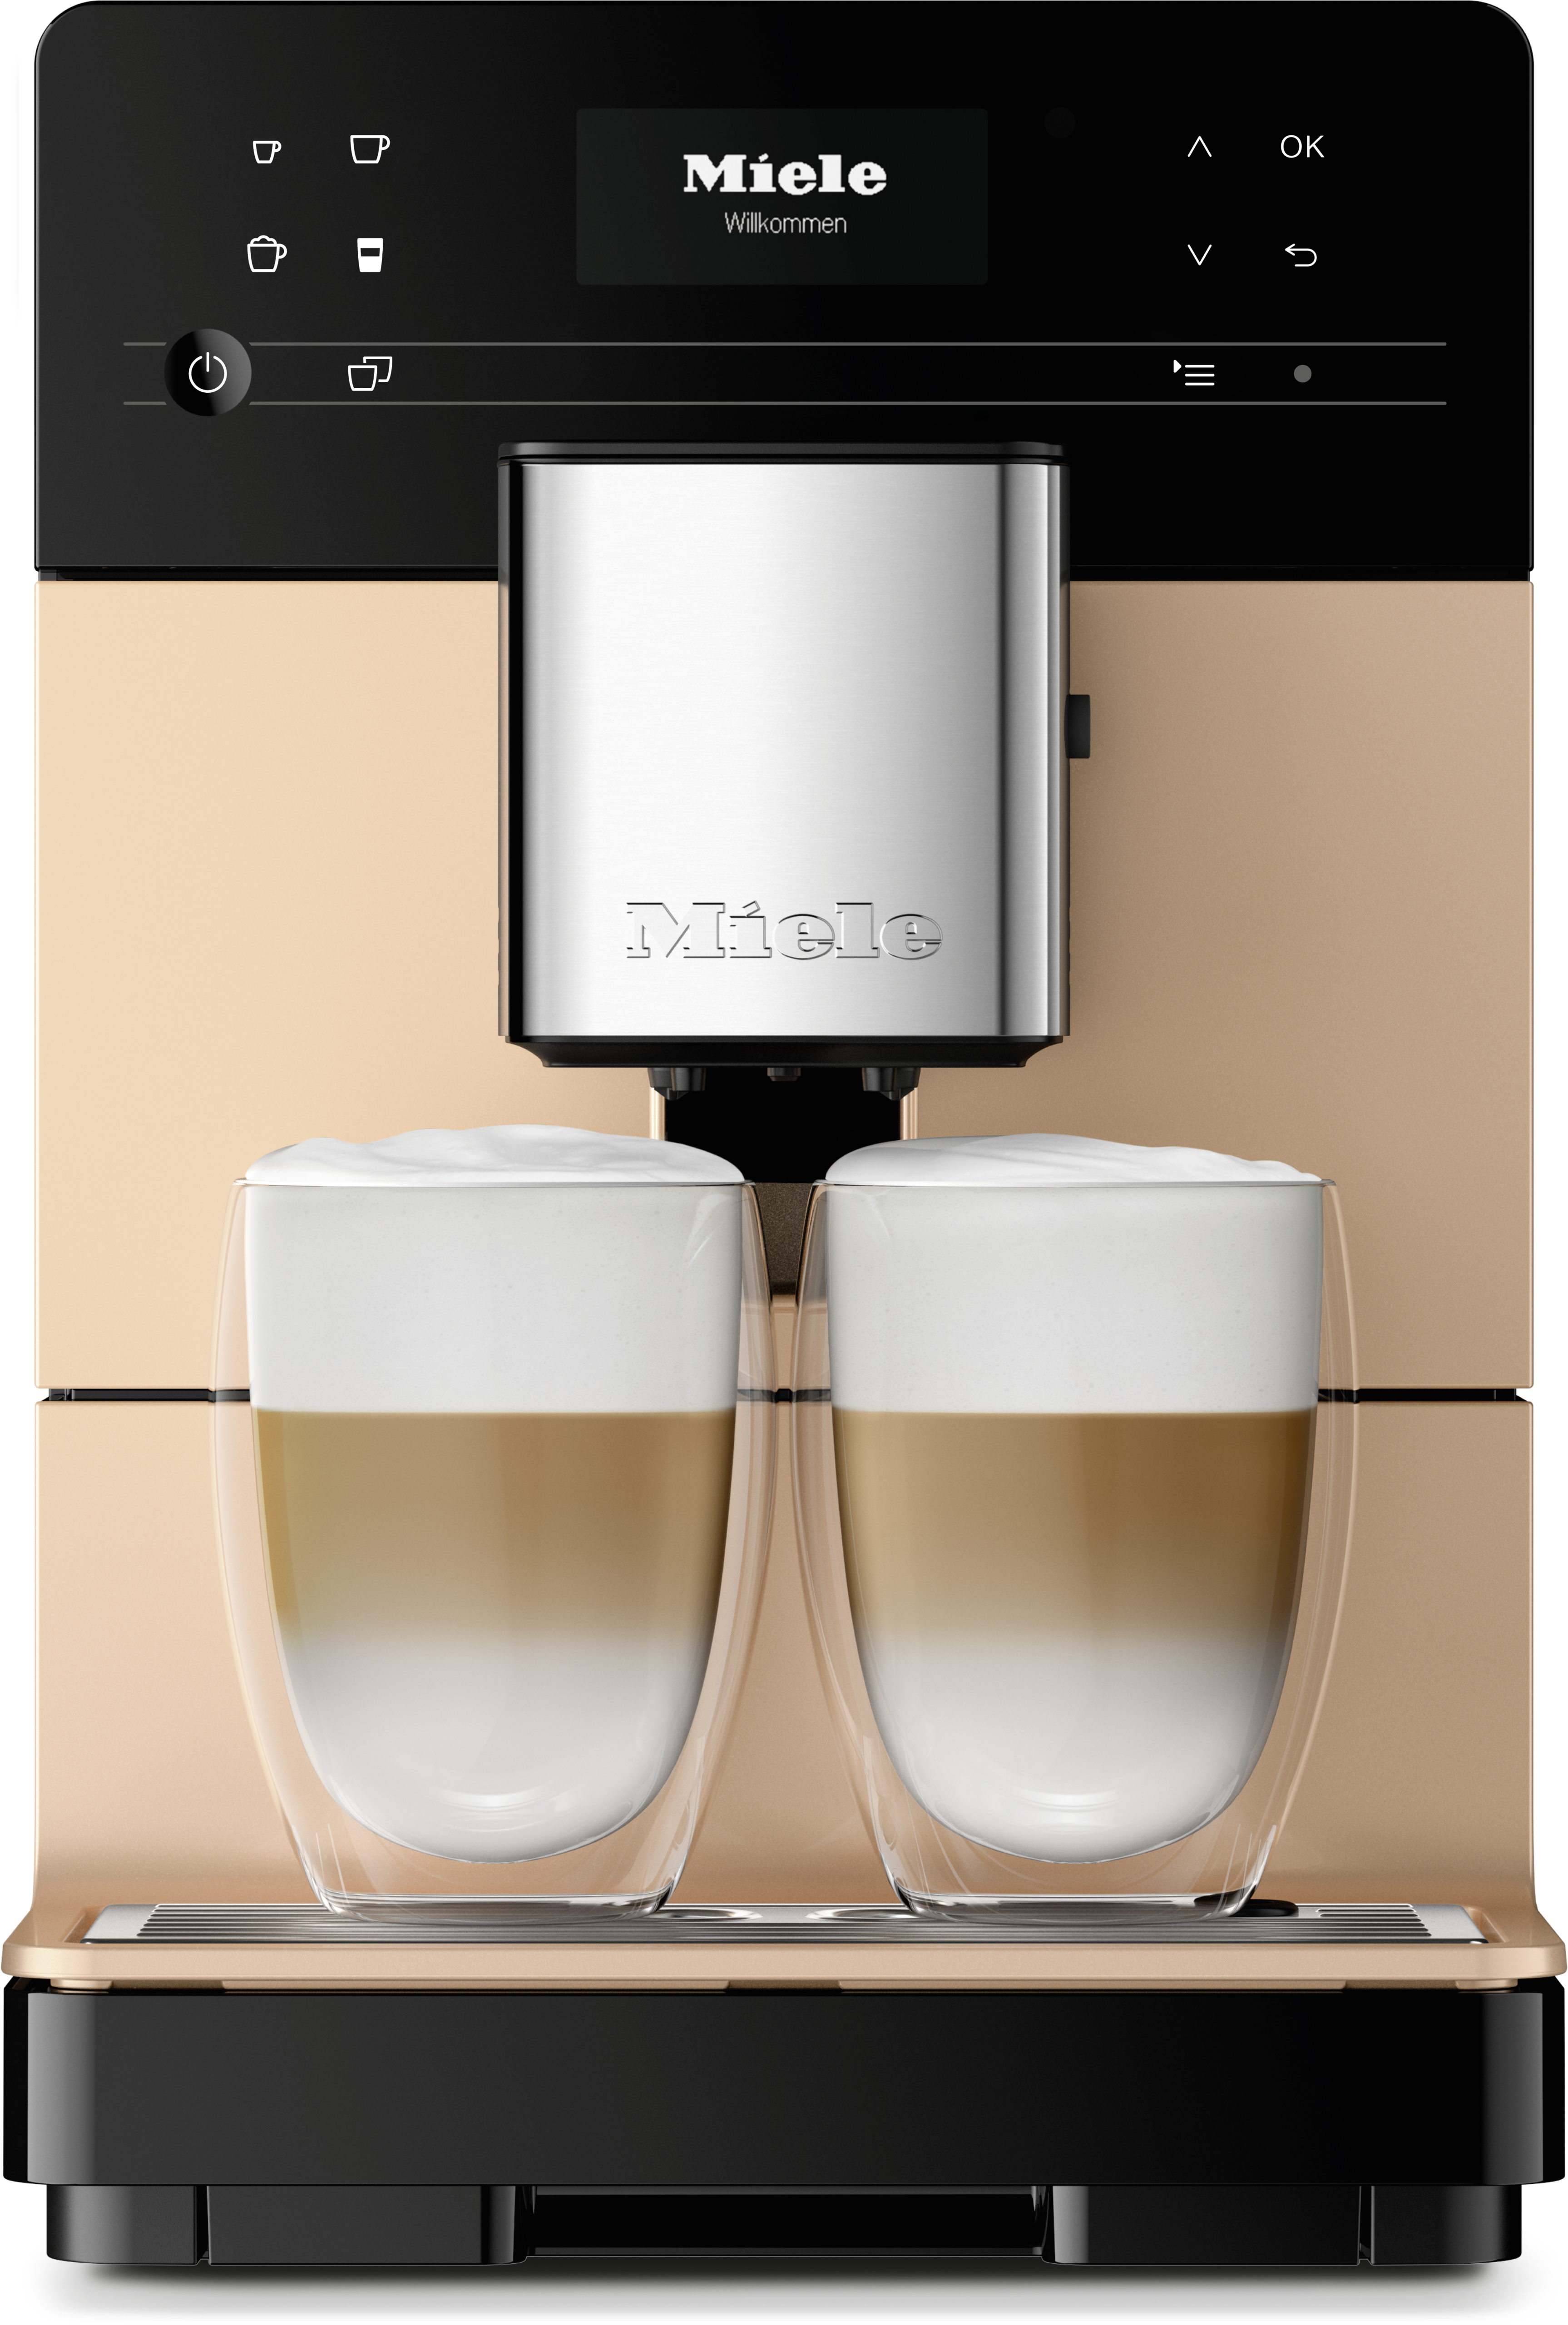 CM 5510 SilenceCountertop coffee machine with OneTouch for Two for the ultimate in coffee enjoyment.